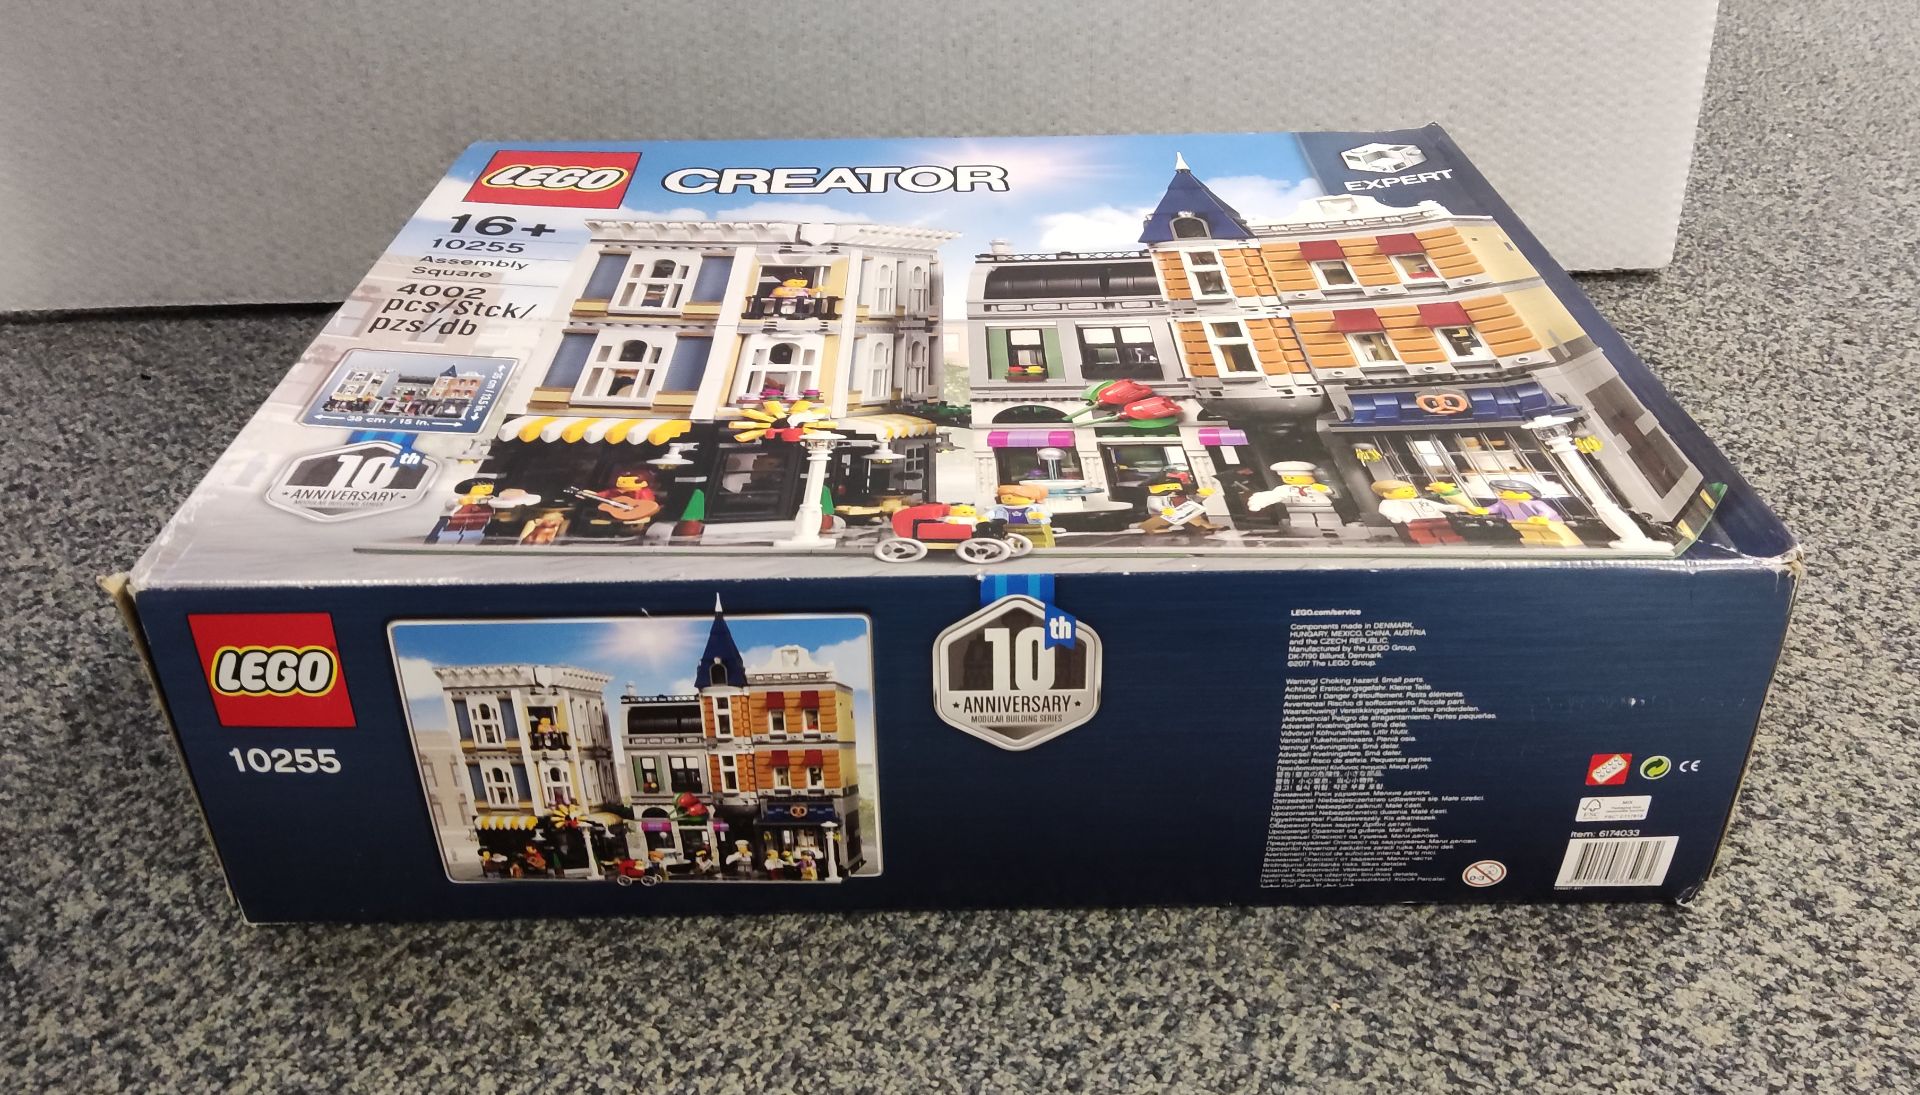 1 x Lego Creator Assembly Square - Set # 10255 - New/Boxed - Image 6 of 6